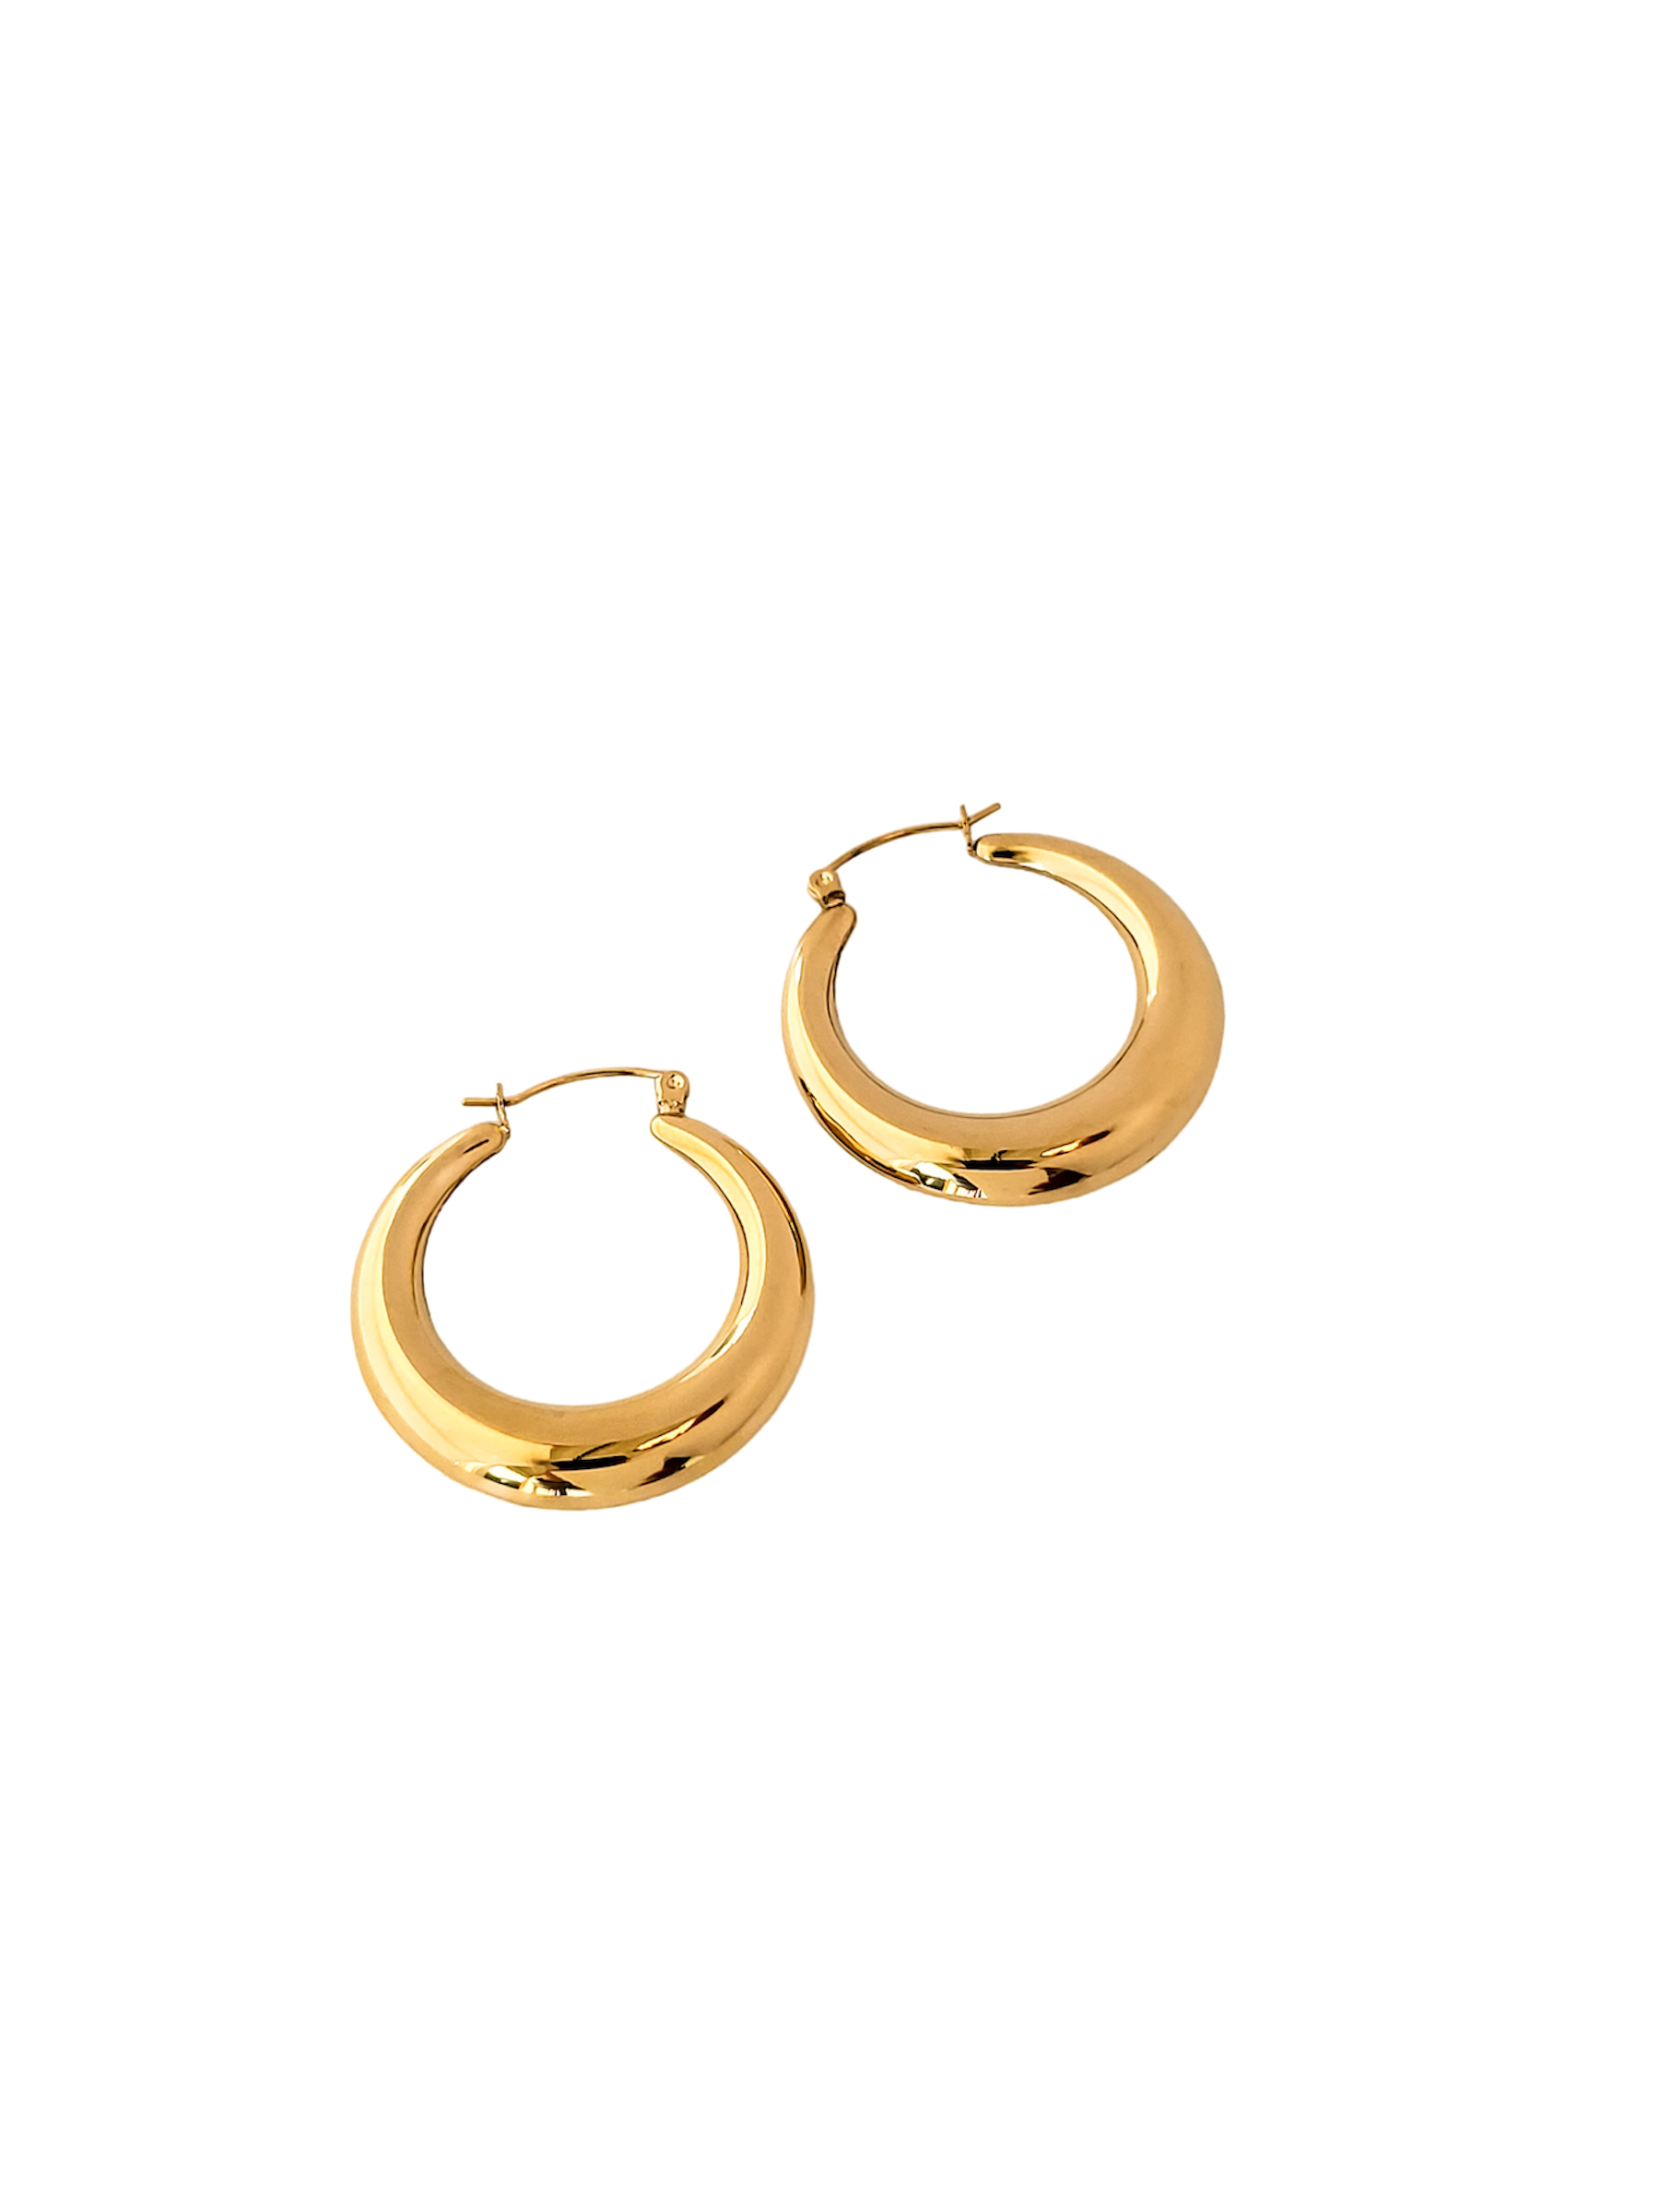 Bold Round Hoops